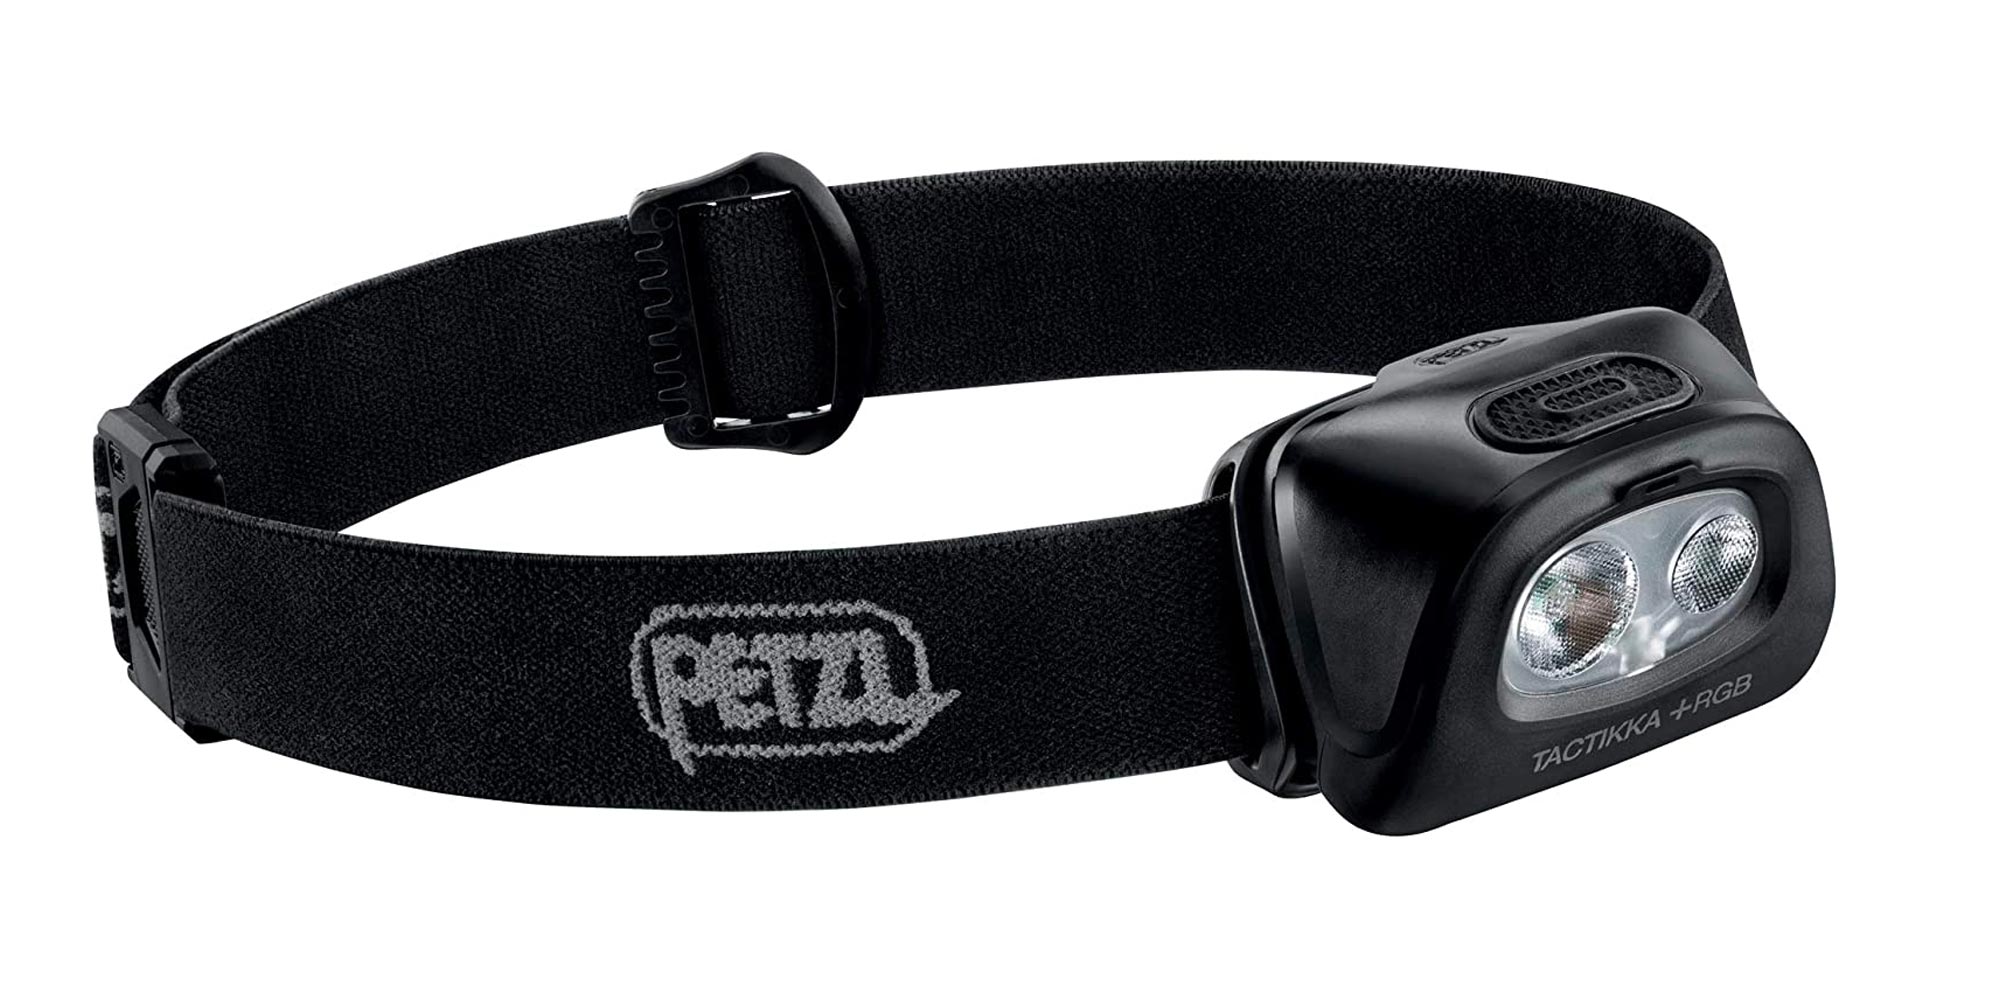 PETZL, TACTIKKA +RGB Stealth Headlamp with 350 Lumens for Fishing and Hunting